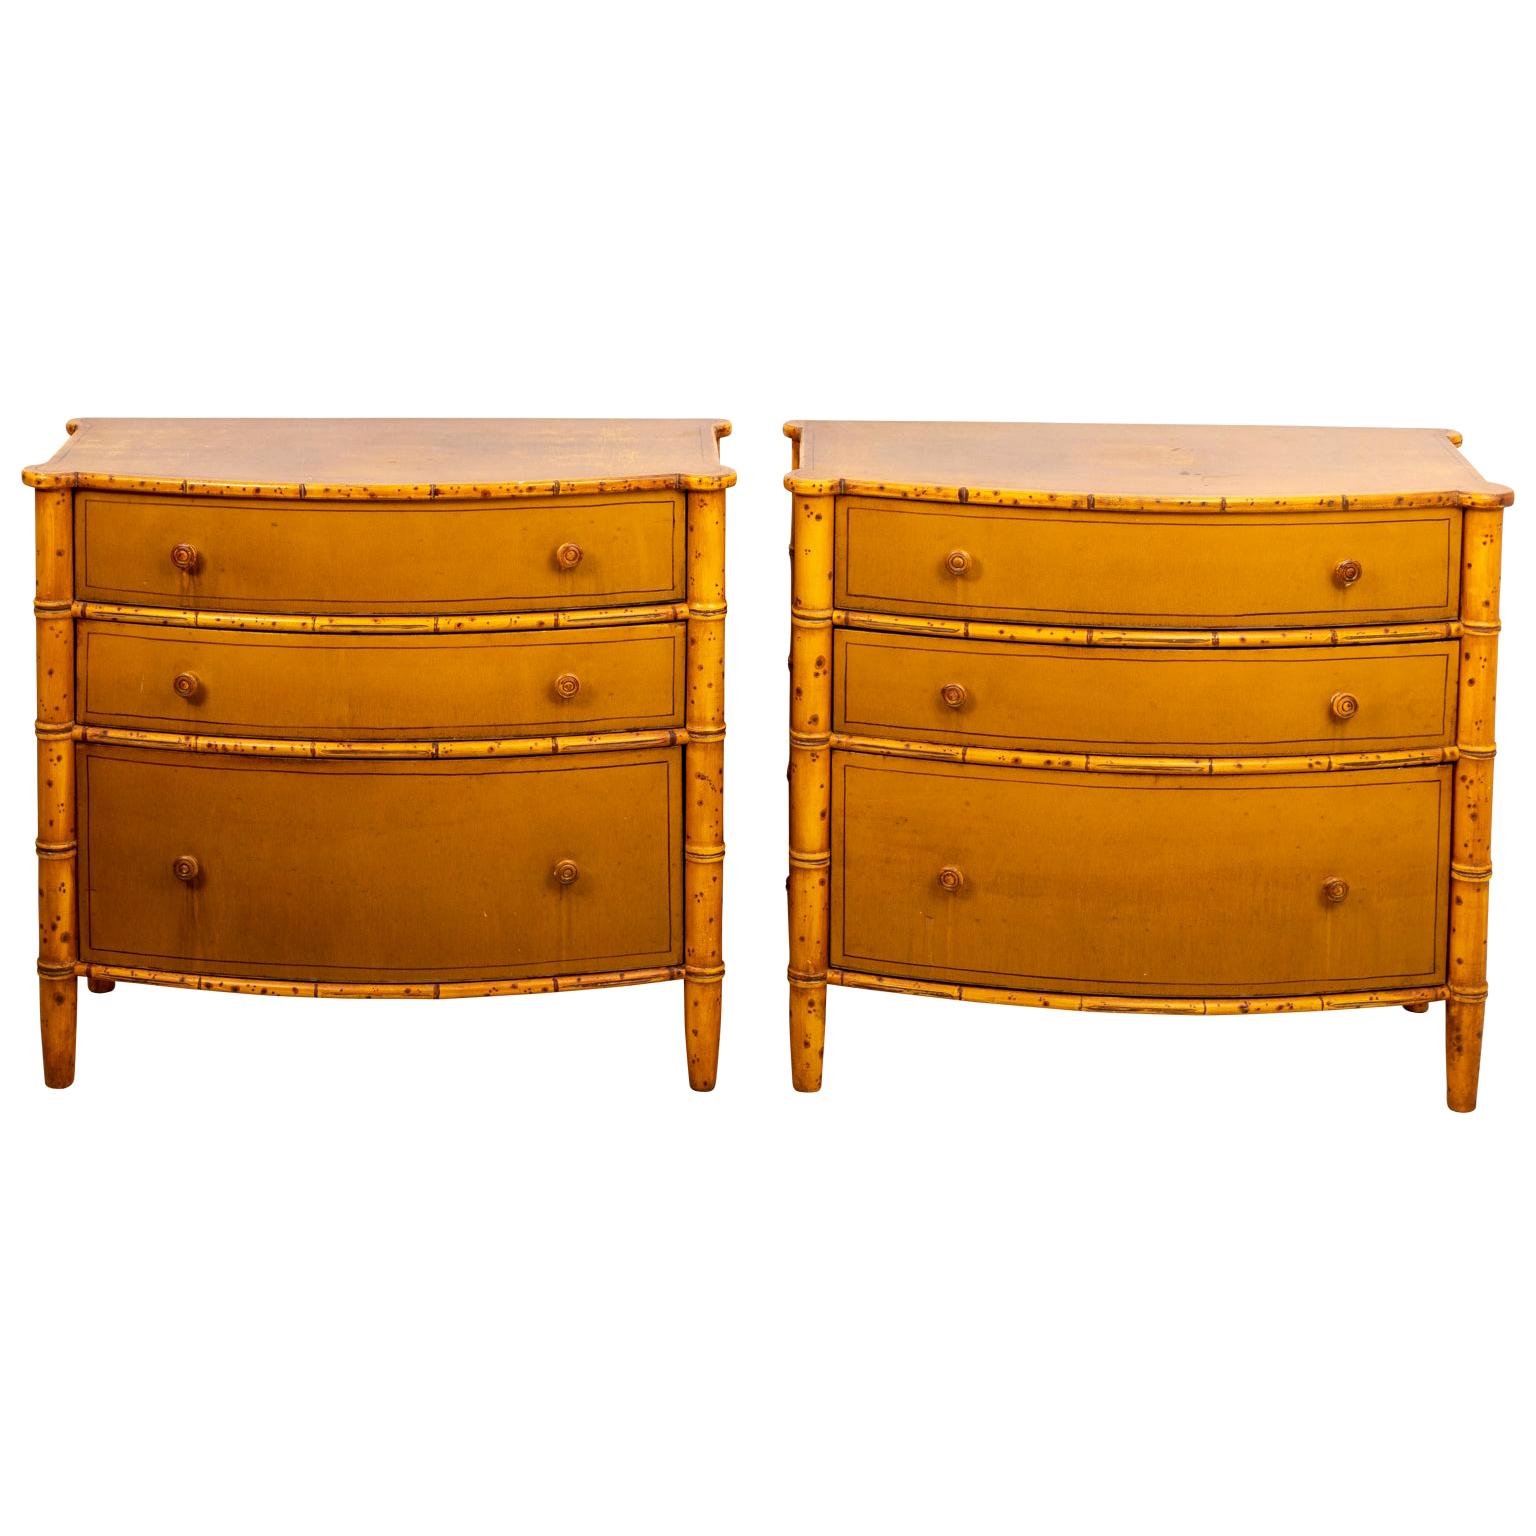 Pair of Faux Bamboo Three Drawer Chest by David Easton